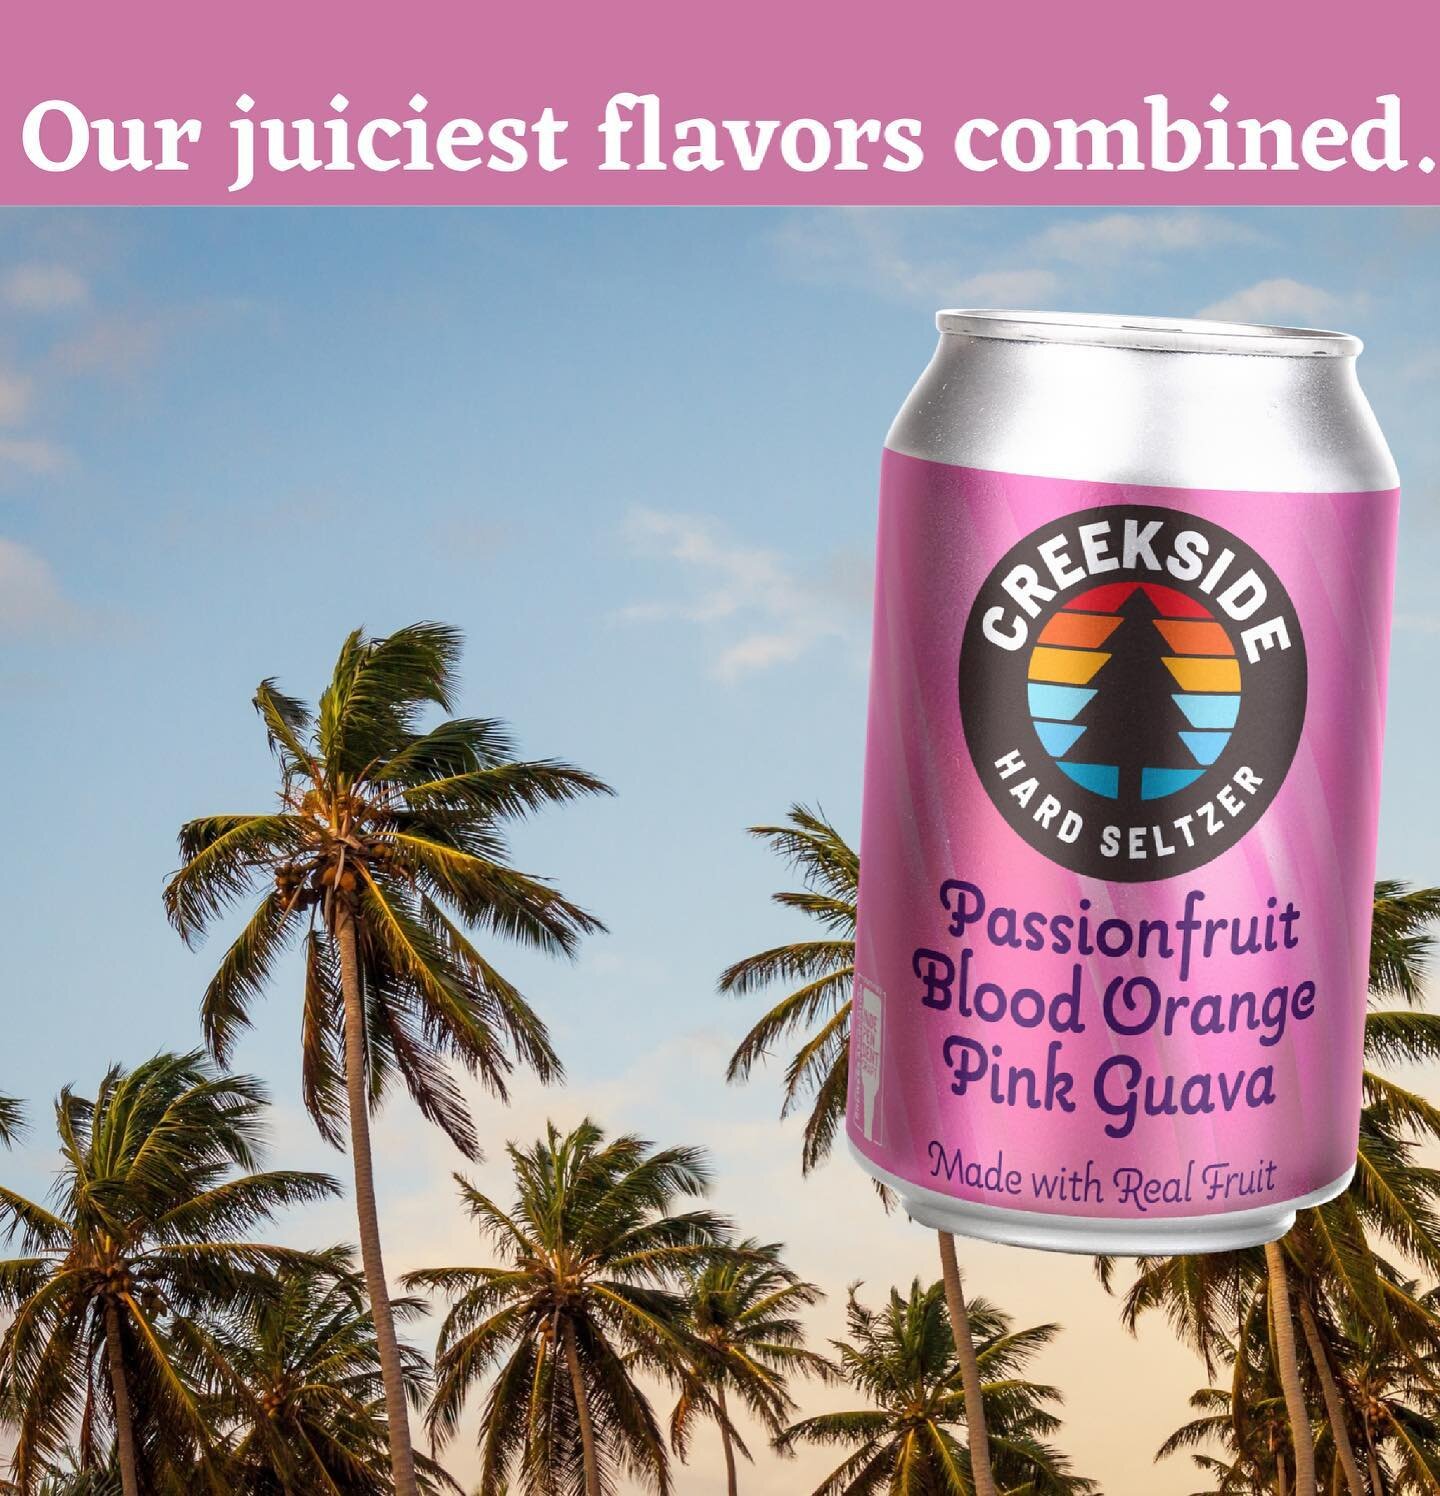 Last but certainly not least on our flavor docket is Passionfruit, Blood Orange, Guava. Sail away in a single sip with this fresh fruity flavor.